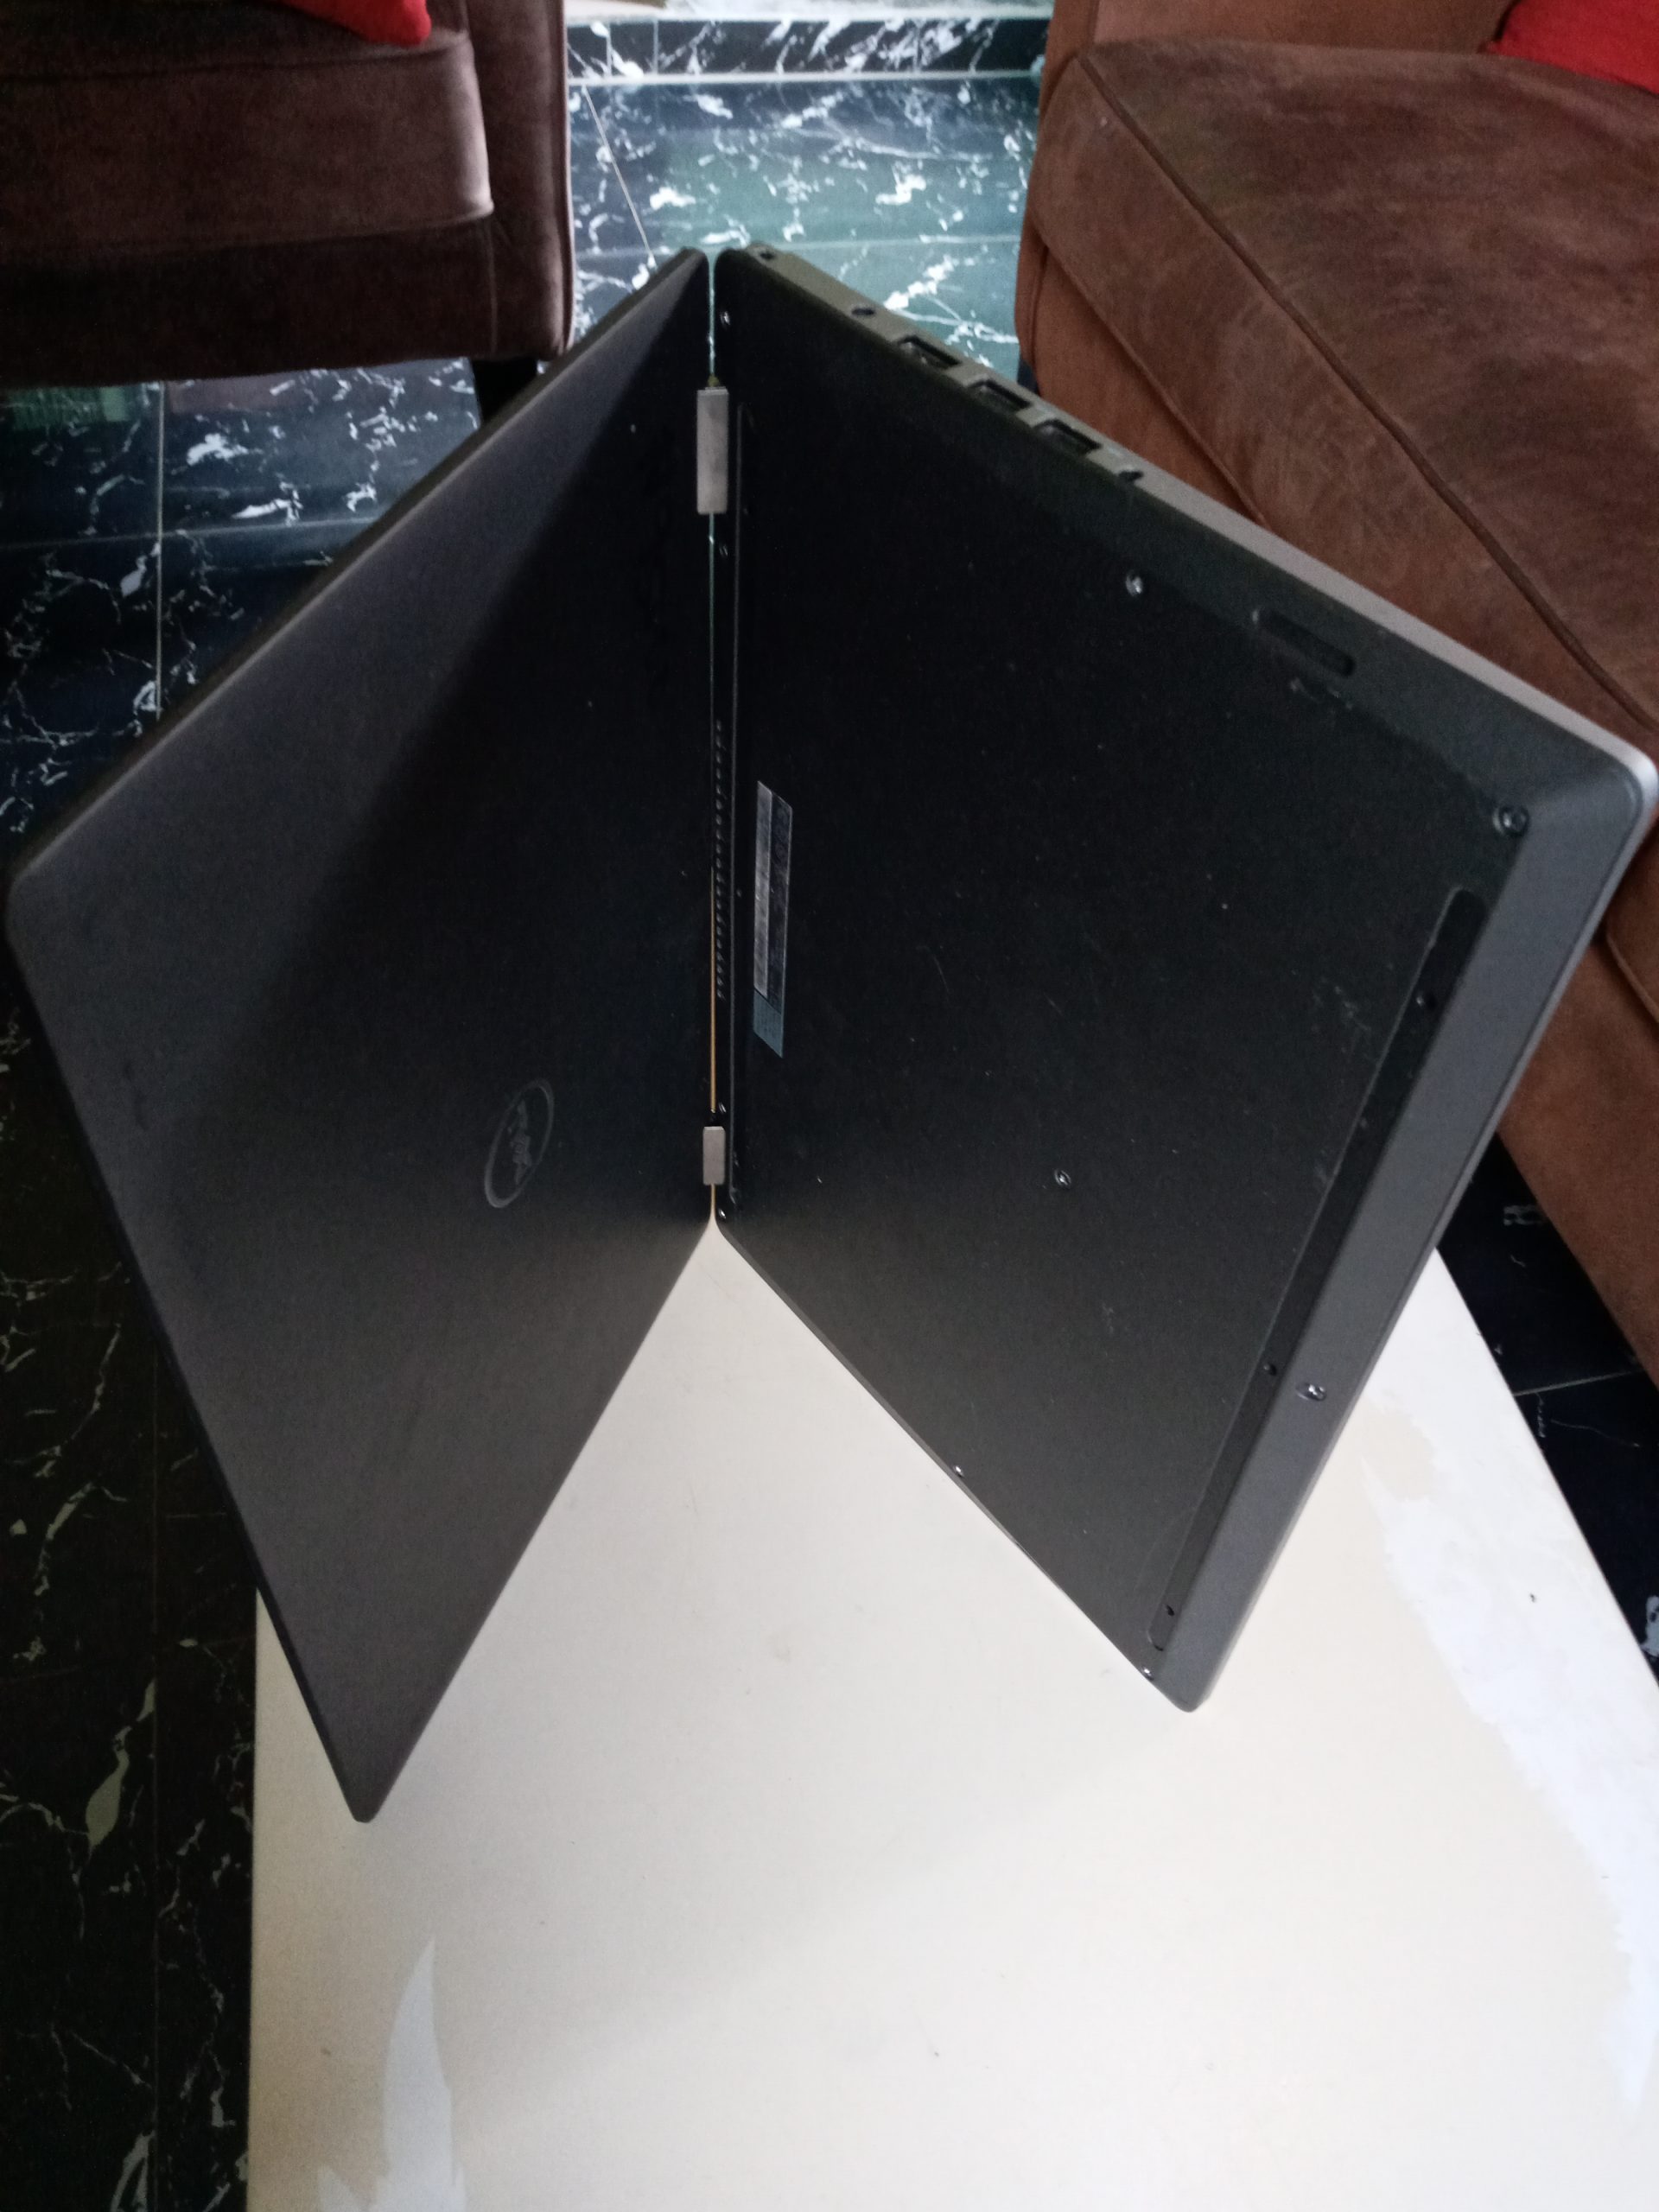 Cheap uk used Dell inspiron 13 7352 laptop for sale in lagos core i5 , 1TBGB HDD , SLIM Keypadlight gbn mobile computer store usedcomputer,laptop,tocumbo,computervillage,ikeja,oshodi,arena,army,lagos,ladipo,ukused,londonused,american used Laptop,secondhand,computerstore,computershop